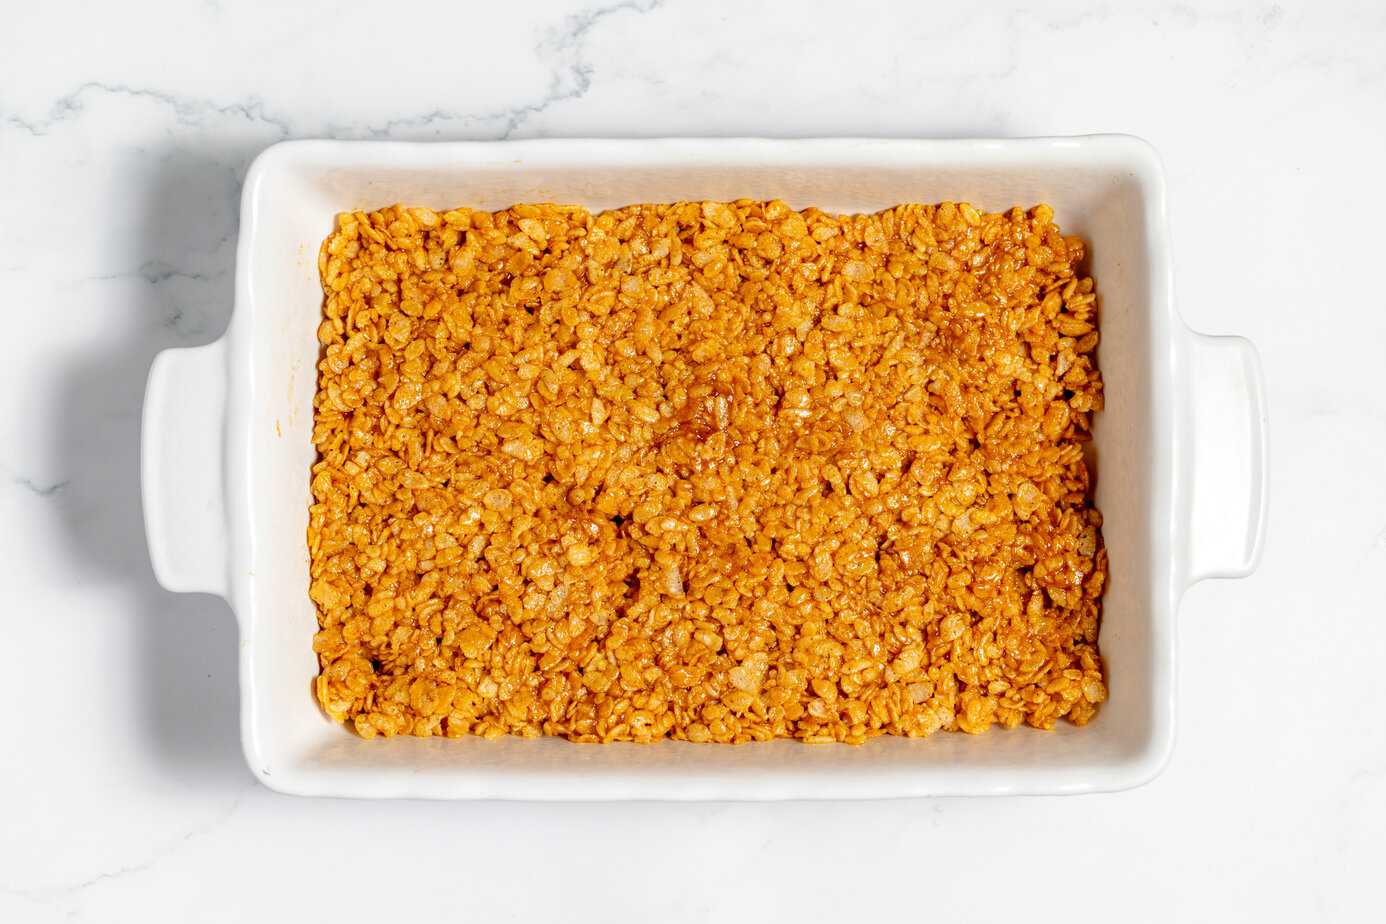 marshmallow and rice cereal mixture pressed into white baking dish